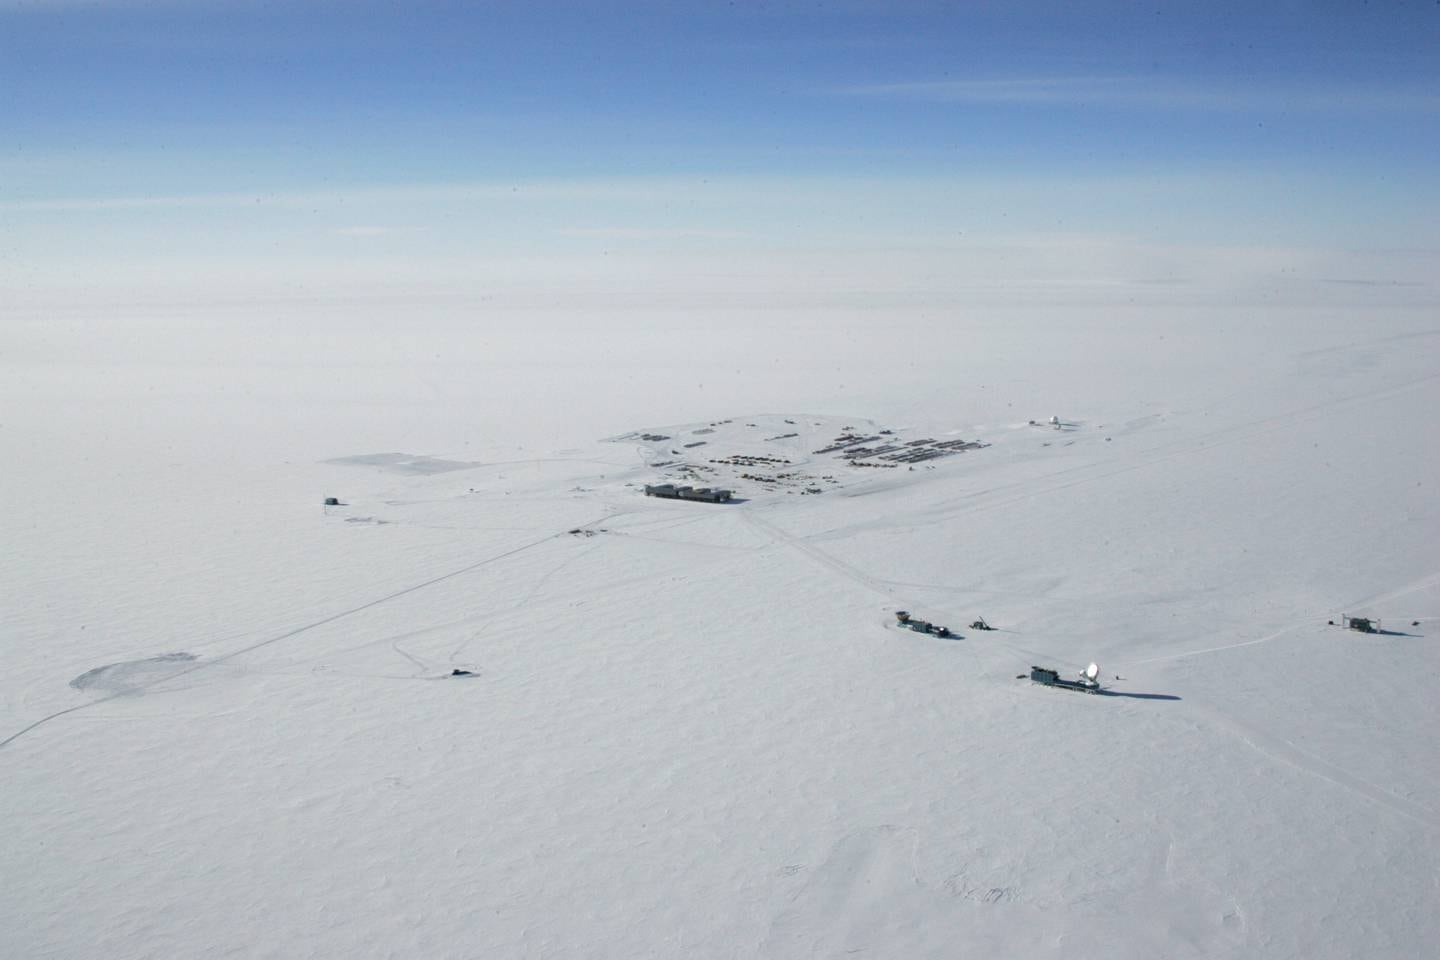 Amundsen-Scott South Pole is one of the world's coldest places, with −82.8°C being the lowest temperature recorded here in 1982. Photo: USAP, NSF